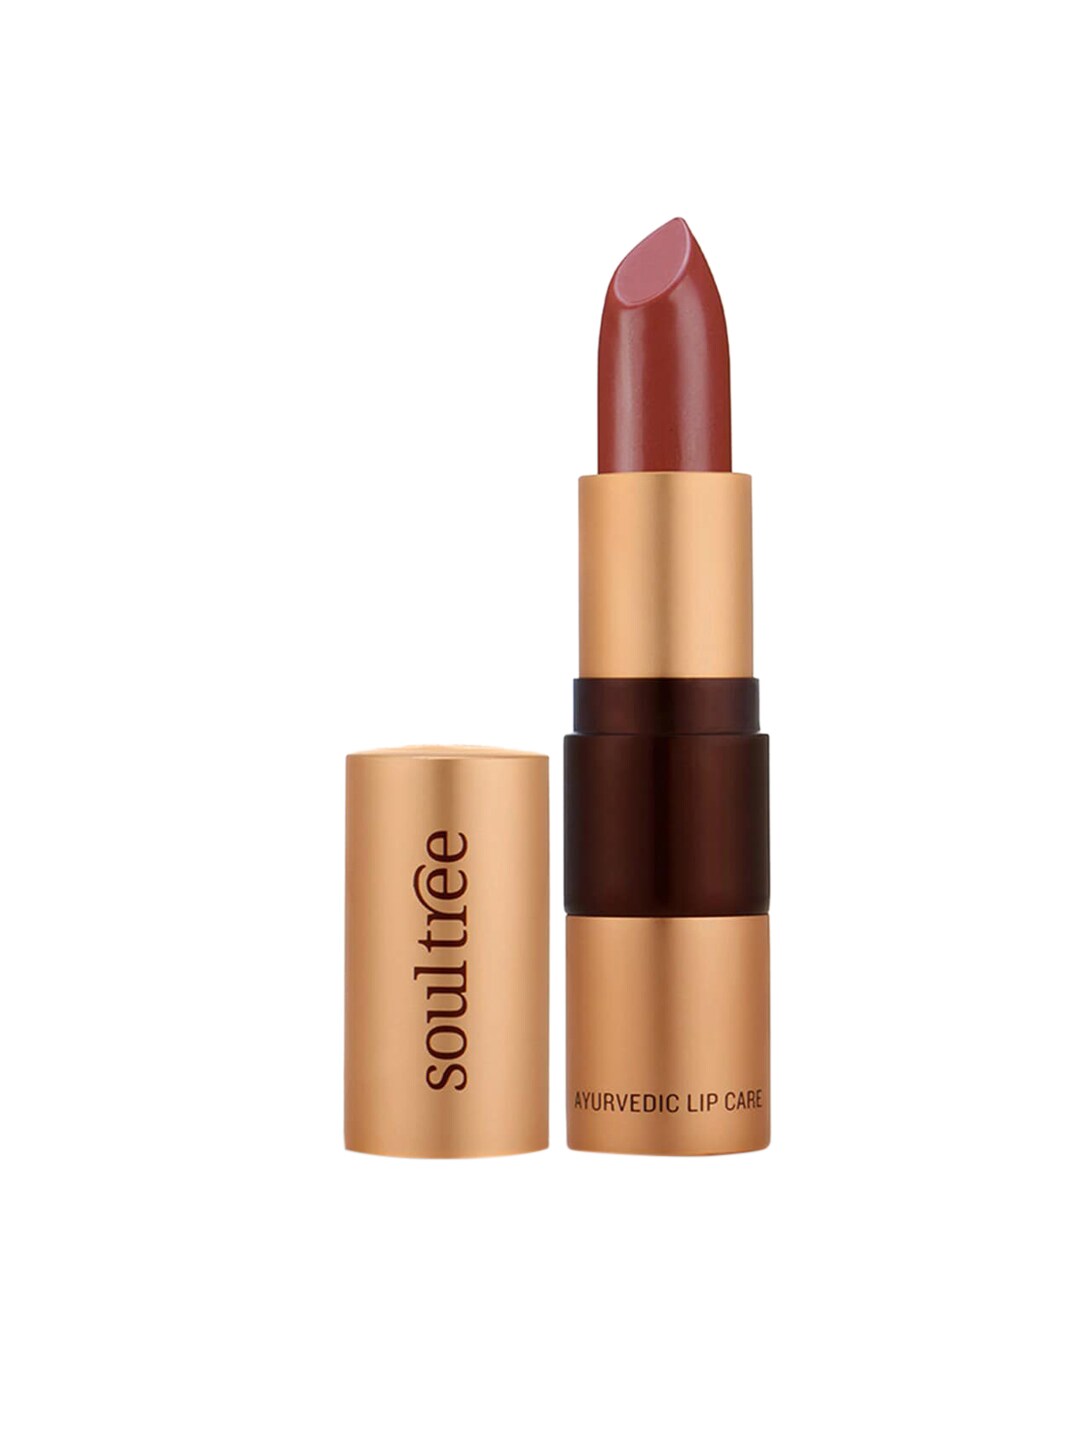 Soultree Ayurvedic Lipstick - Rose Clay 610 - 4gm Price in India